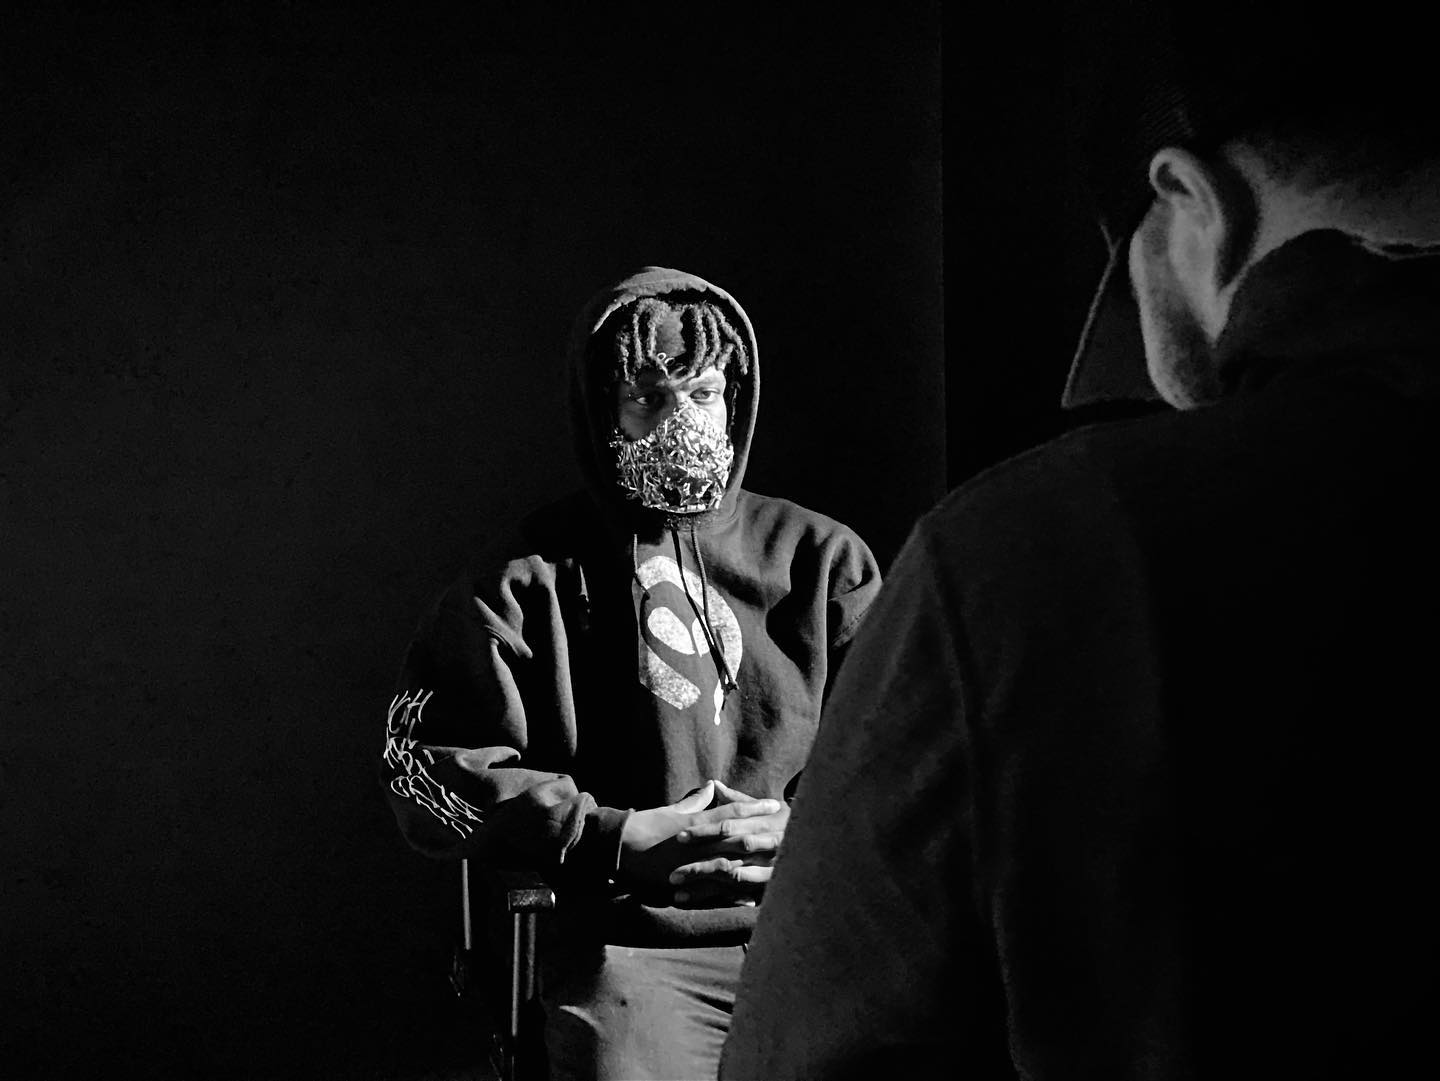 Black and white photo of music artist in a mask sitting in an interview